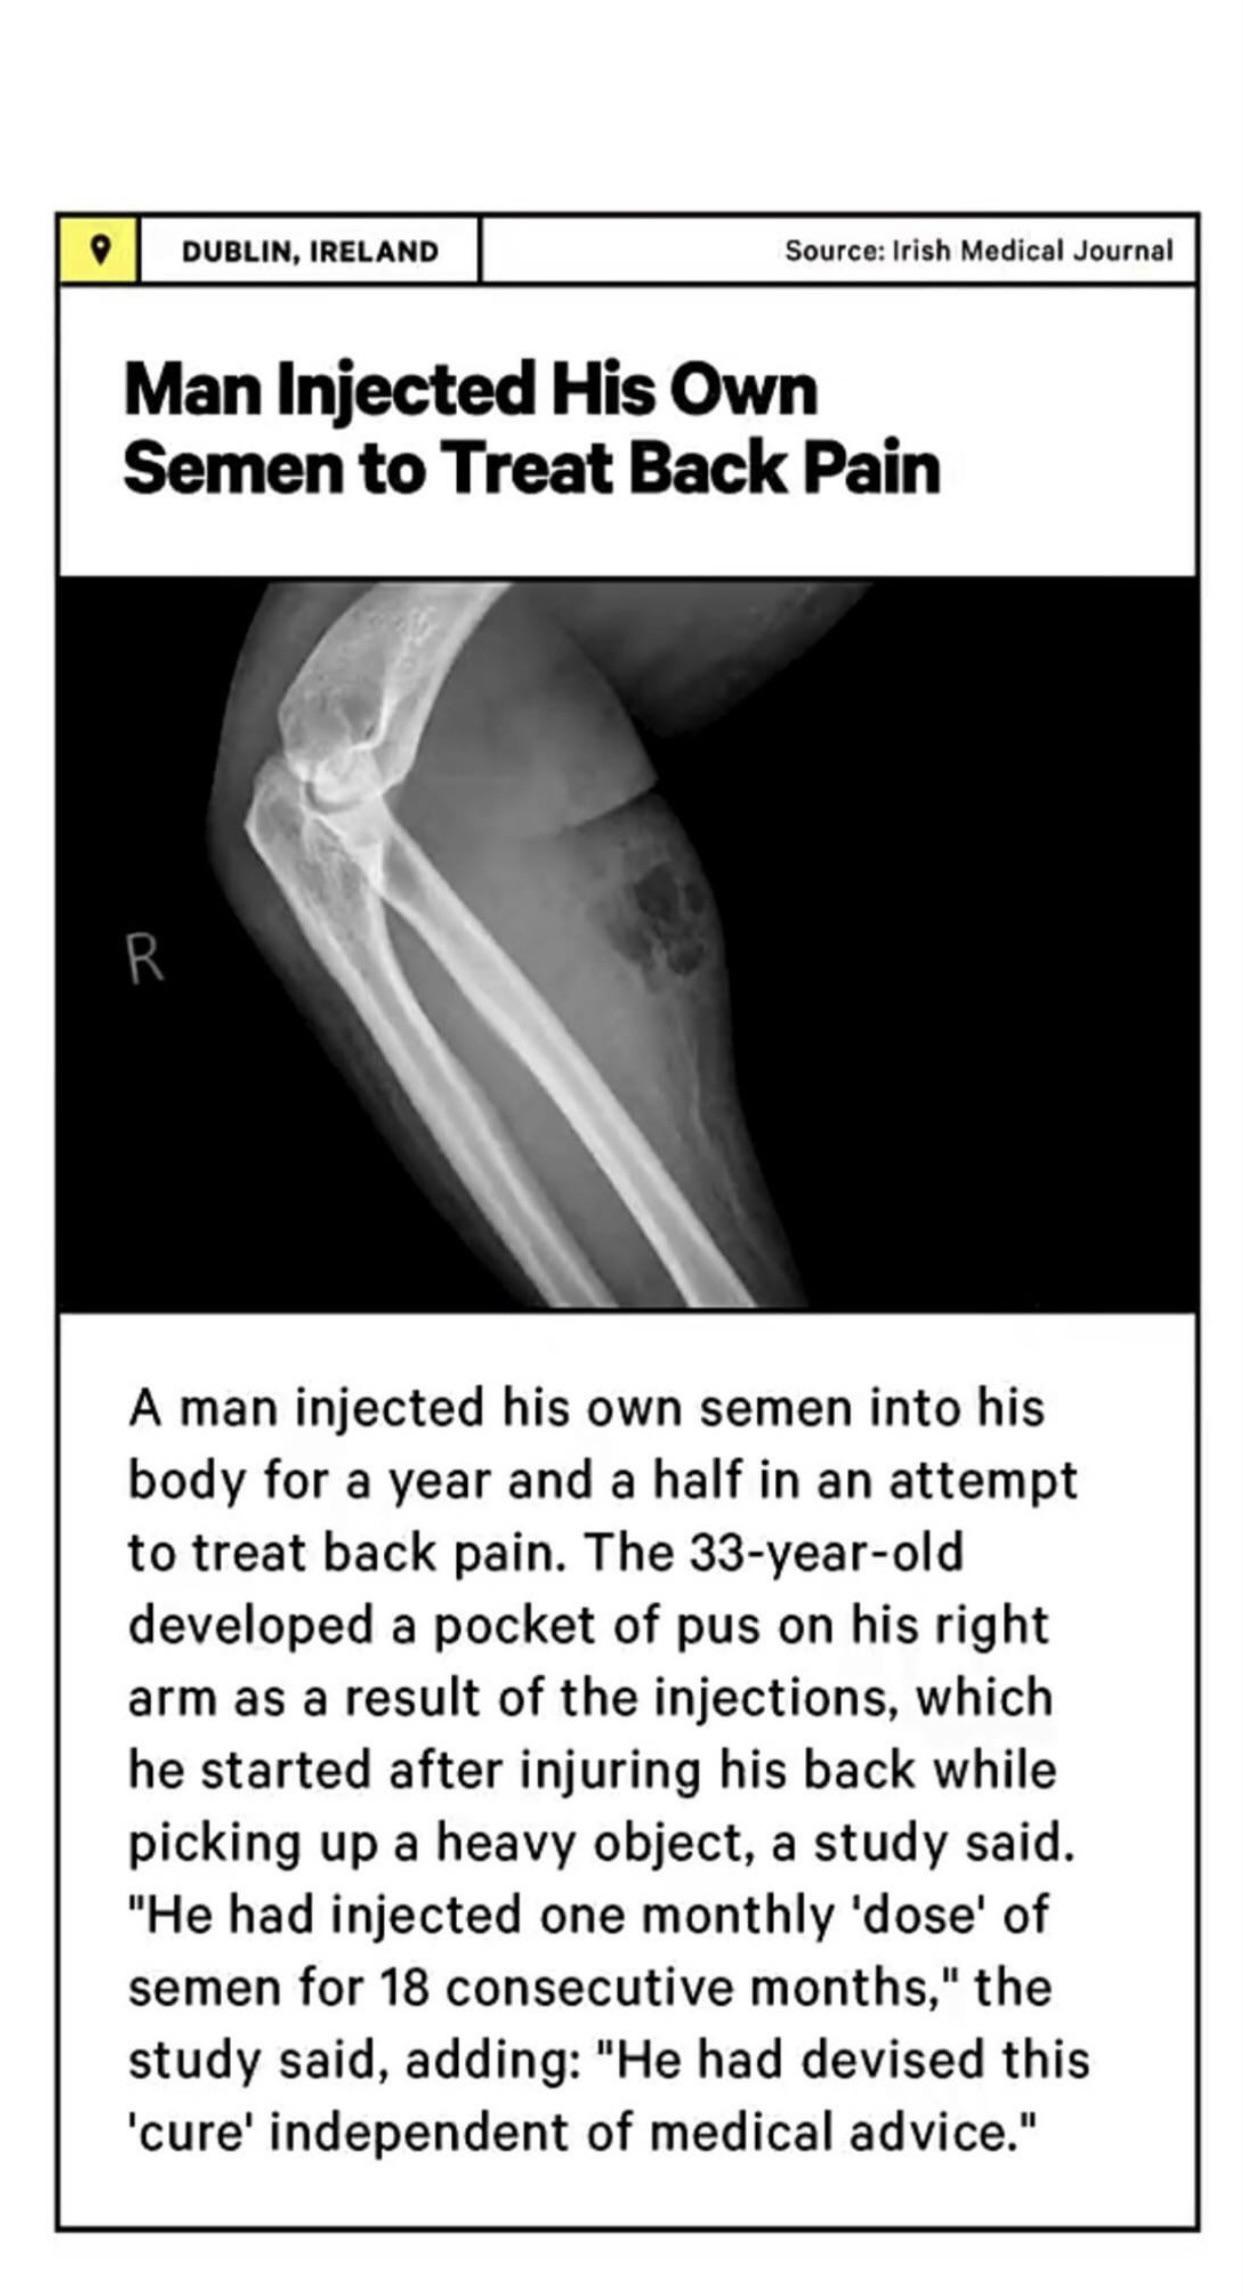 facepalm pics - arm - Dublin, Ireland Source Irish Medical Journal Man Injected His Own Semen to Treat Back Pain R A man injected his own semen into his body for a year and a half in an attempt to treat back pain. The 33yearold developed a pocket of pus o